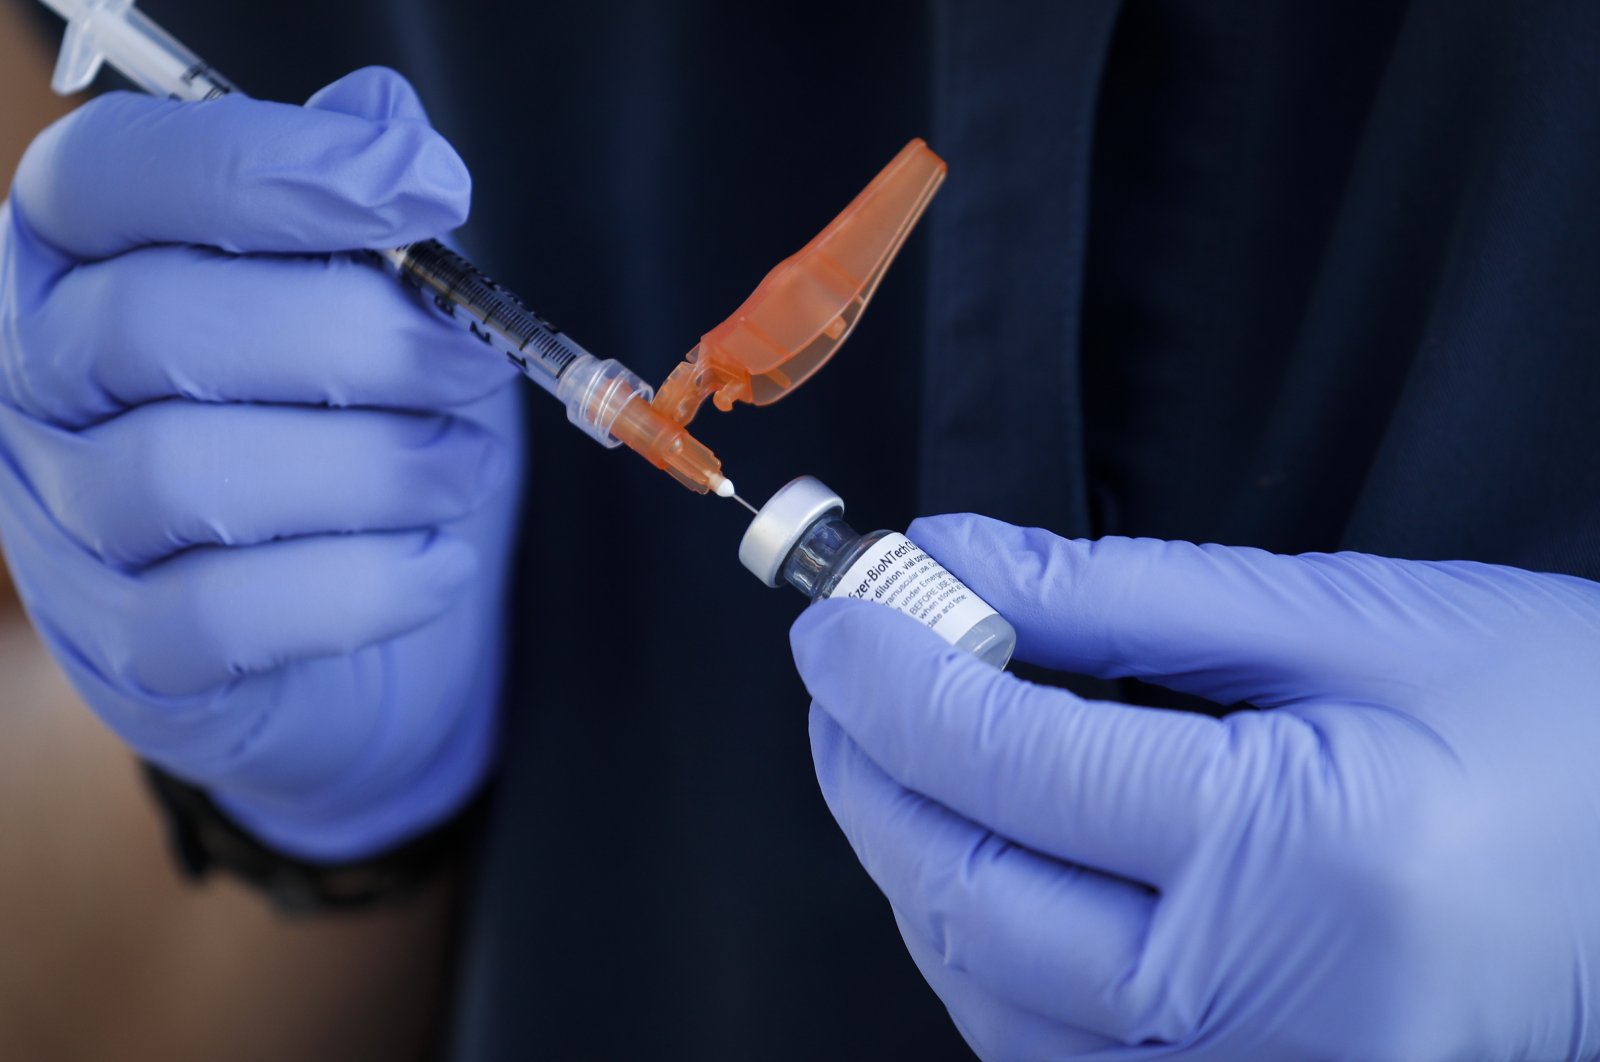 A health care worker prepares a syringe with the Pfizer-BioNTech COVID-19 vaccine at a vaccination clinic in Arleta, U.S., Aug. 23, 2021. (EPA Photo)